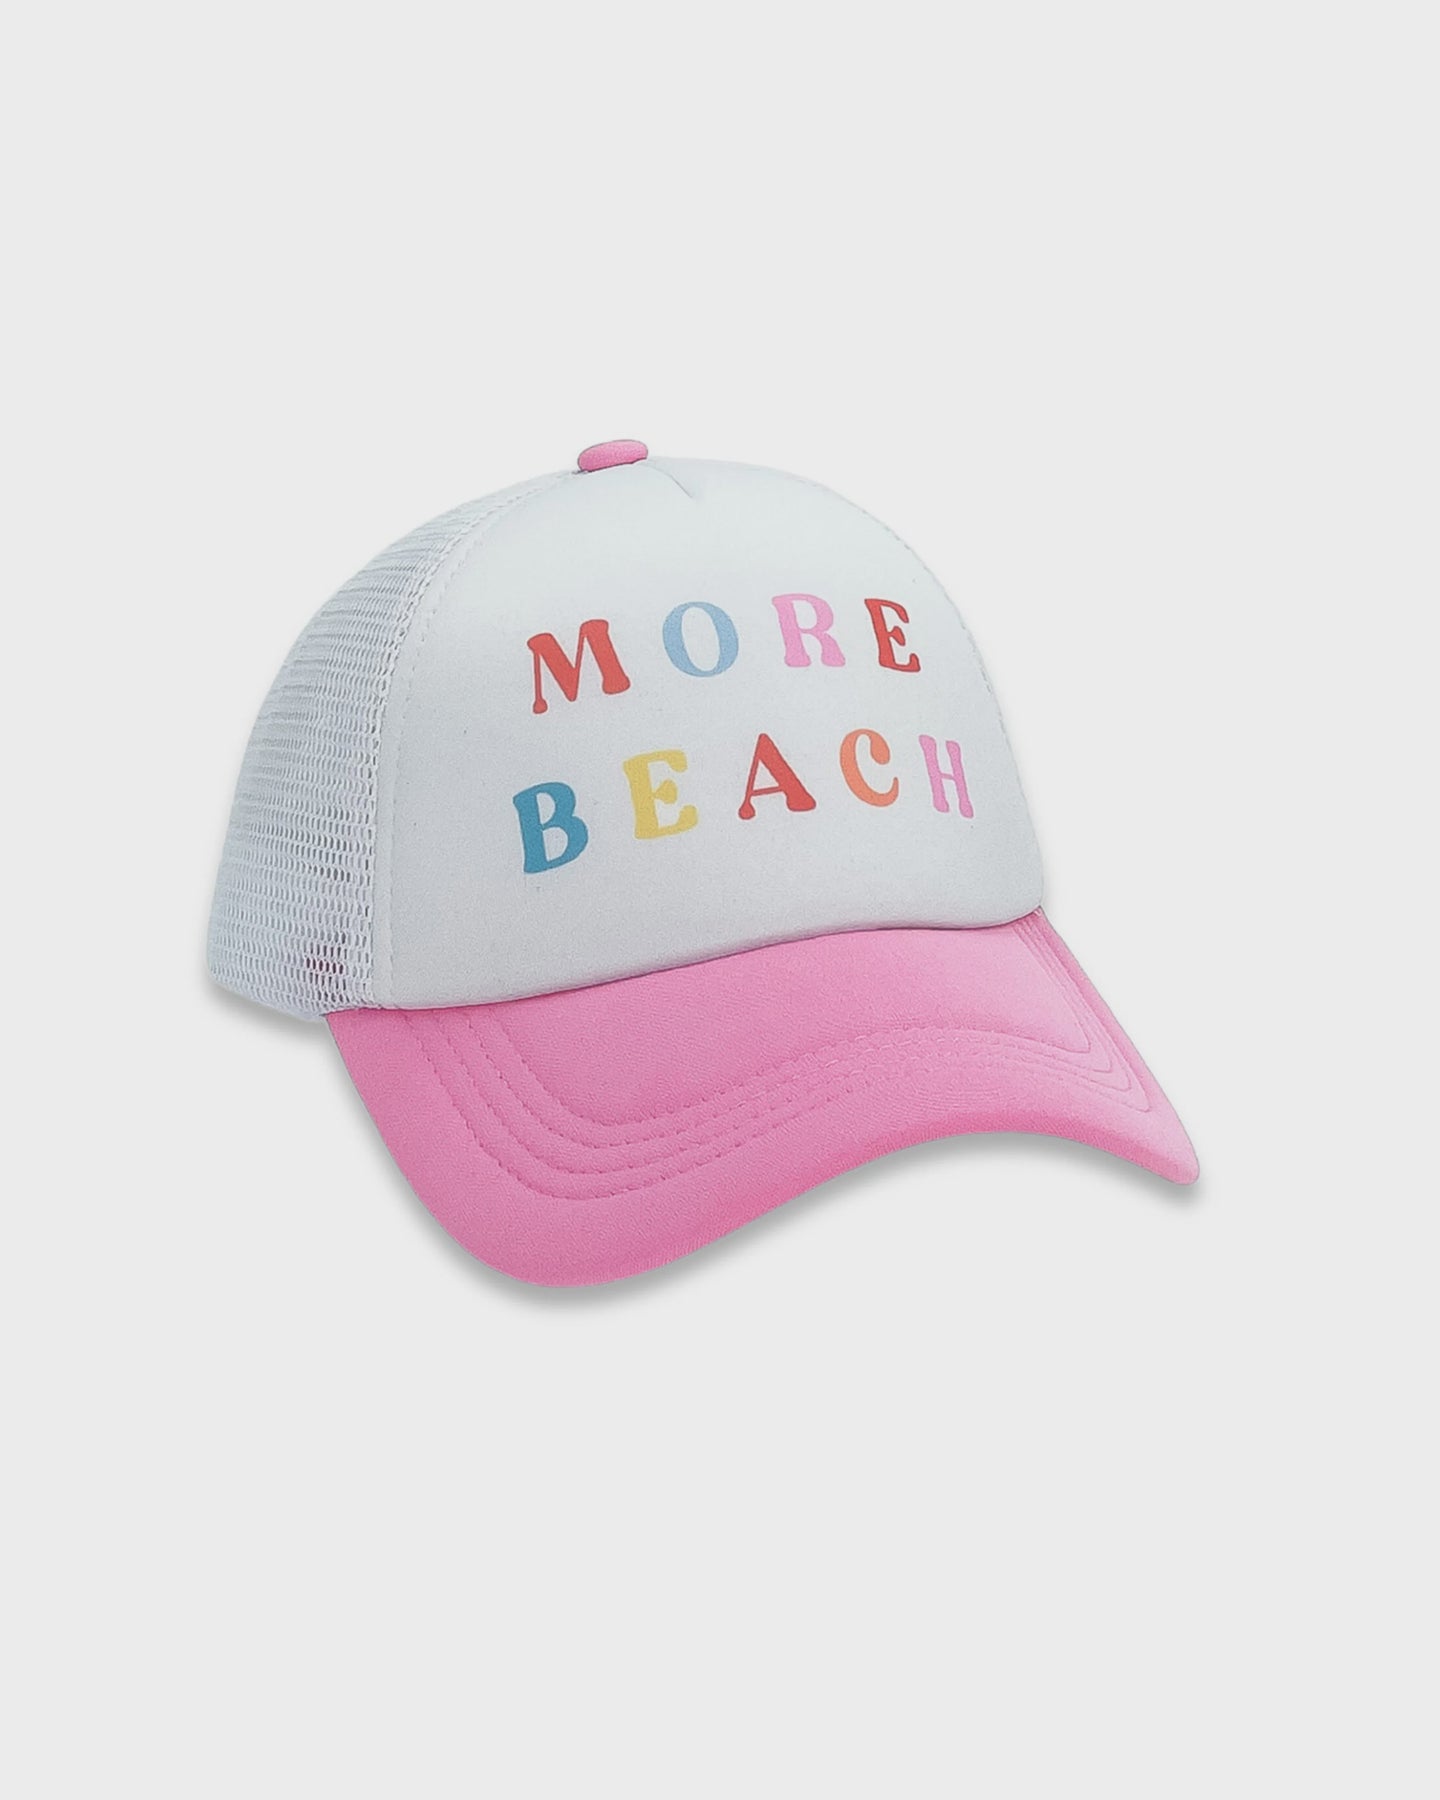 Feather  Arrow - More Beach Trucker Hat - Prism Pink/White